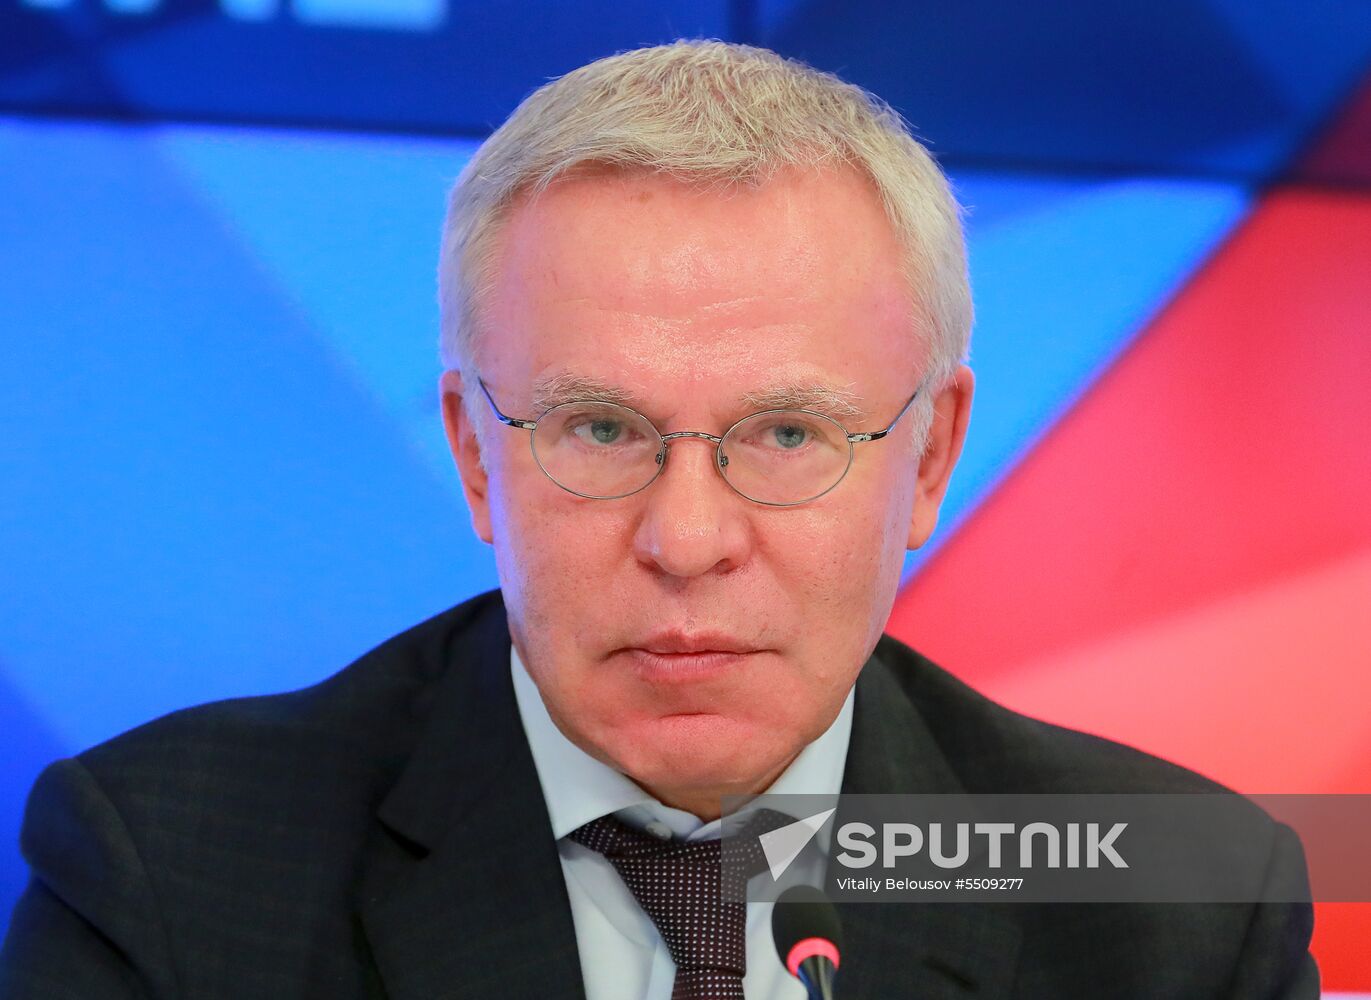 News conference on Vyacheslav Fetisov's appointment as UN Goodwill Ambassador for Arctic and Antarctic